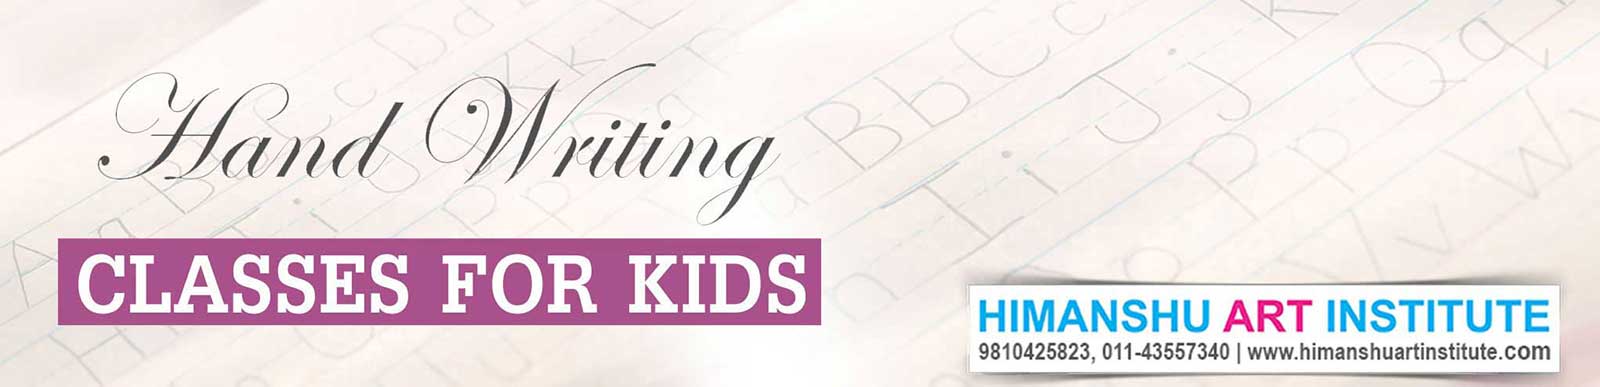 Hand Writing Classes for Kids in Delhi, India